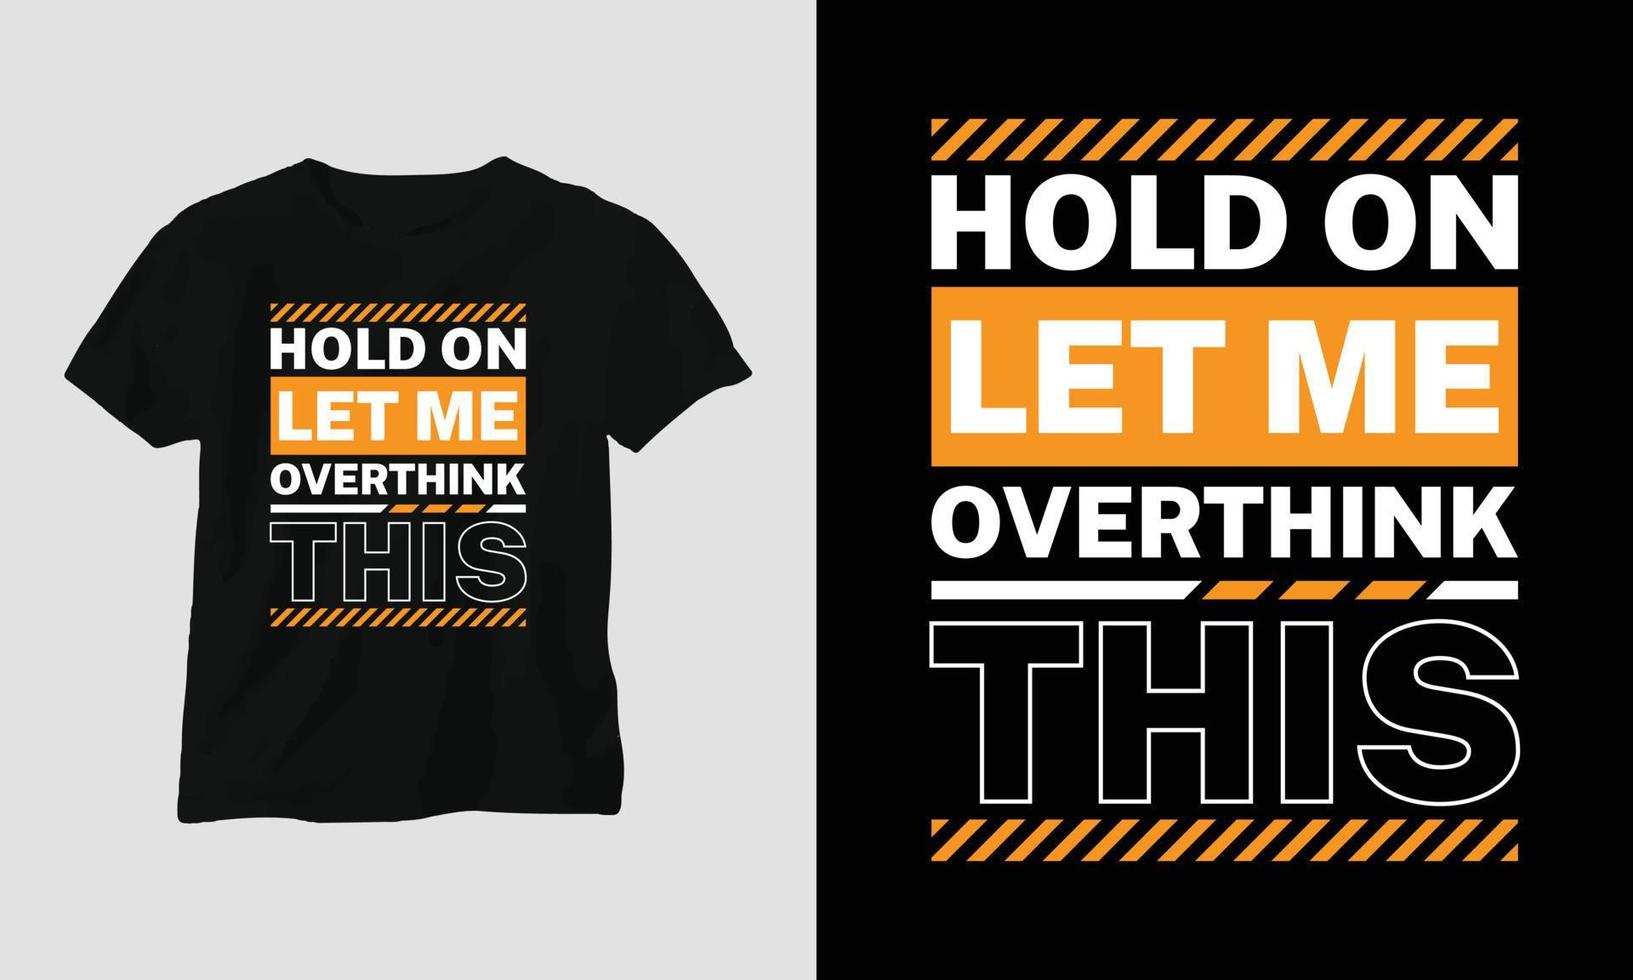 hold on let me overthink this - Sarcasm Typography T-shirt and apparel design vector